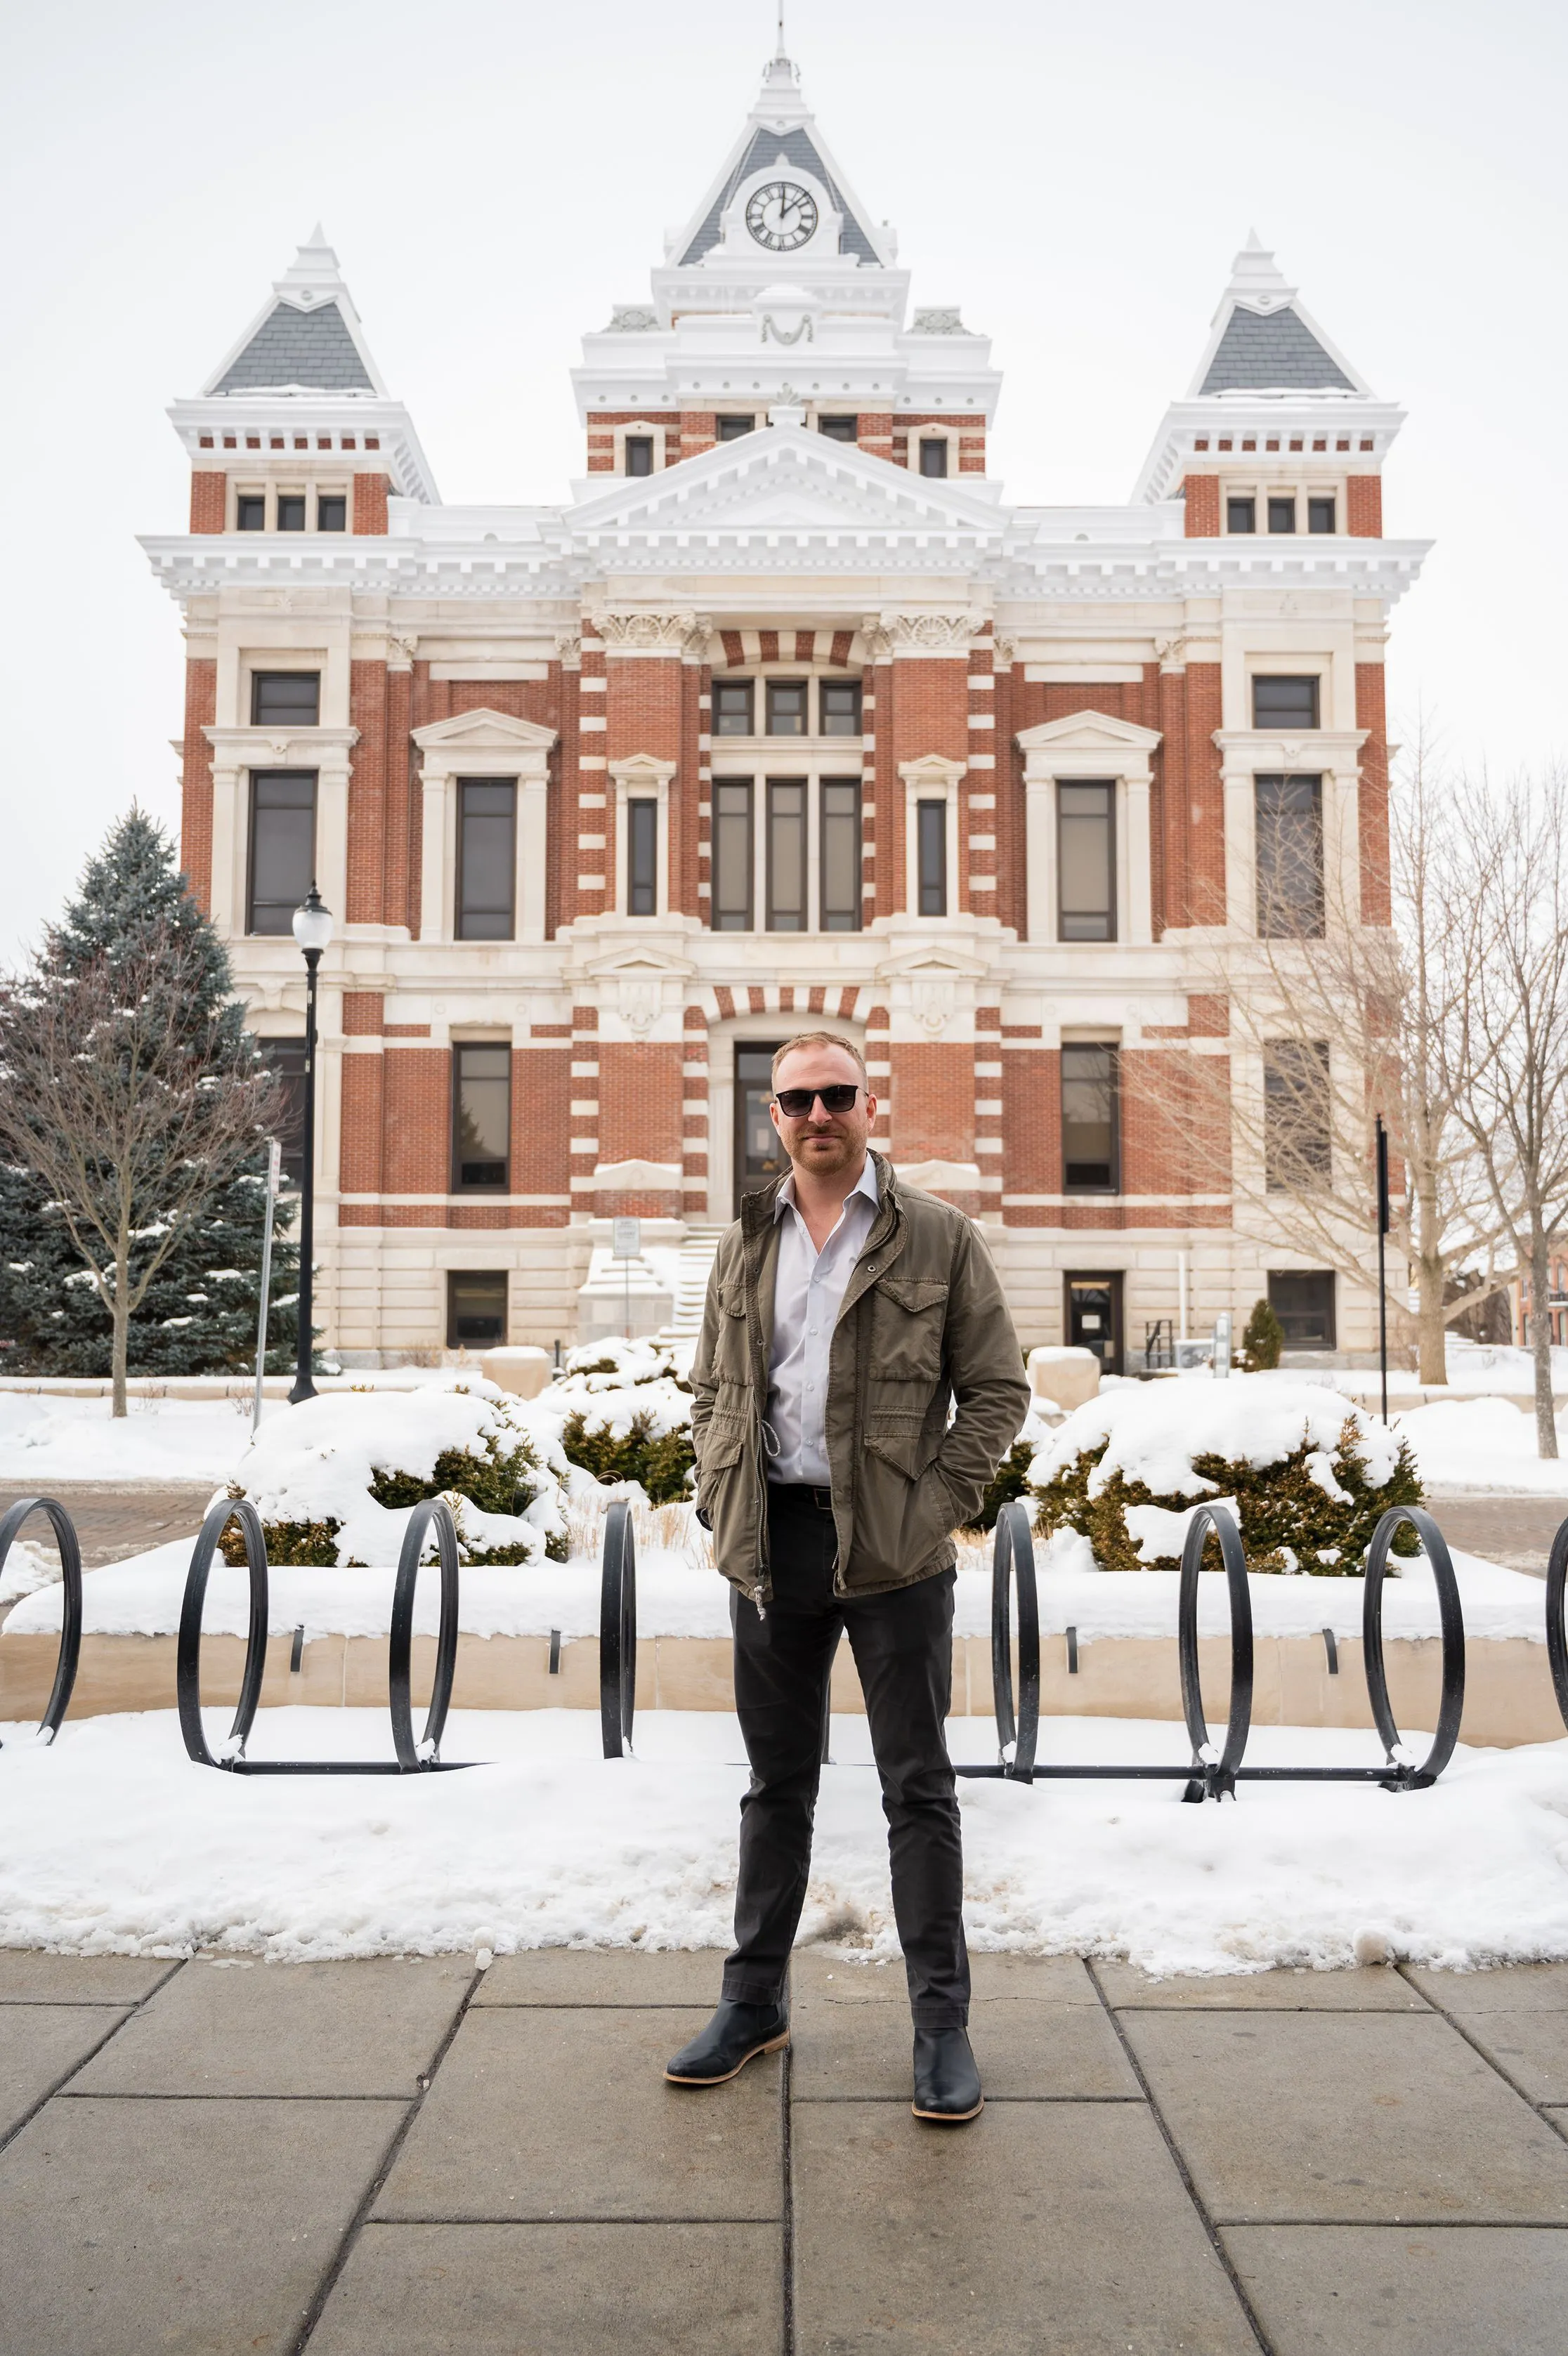 Person standing in front of a historic brick building with snowfall.